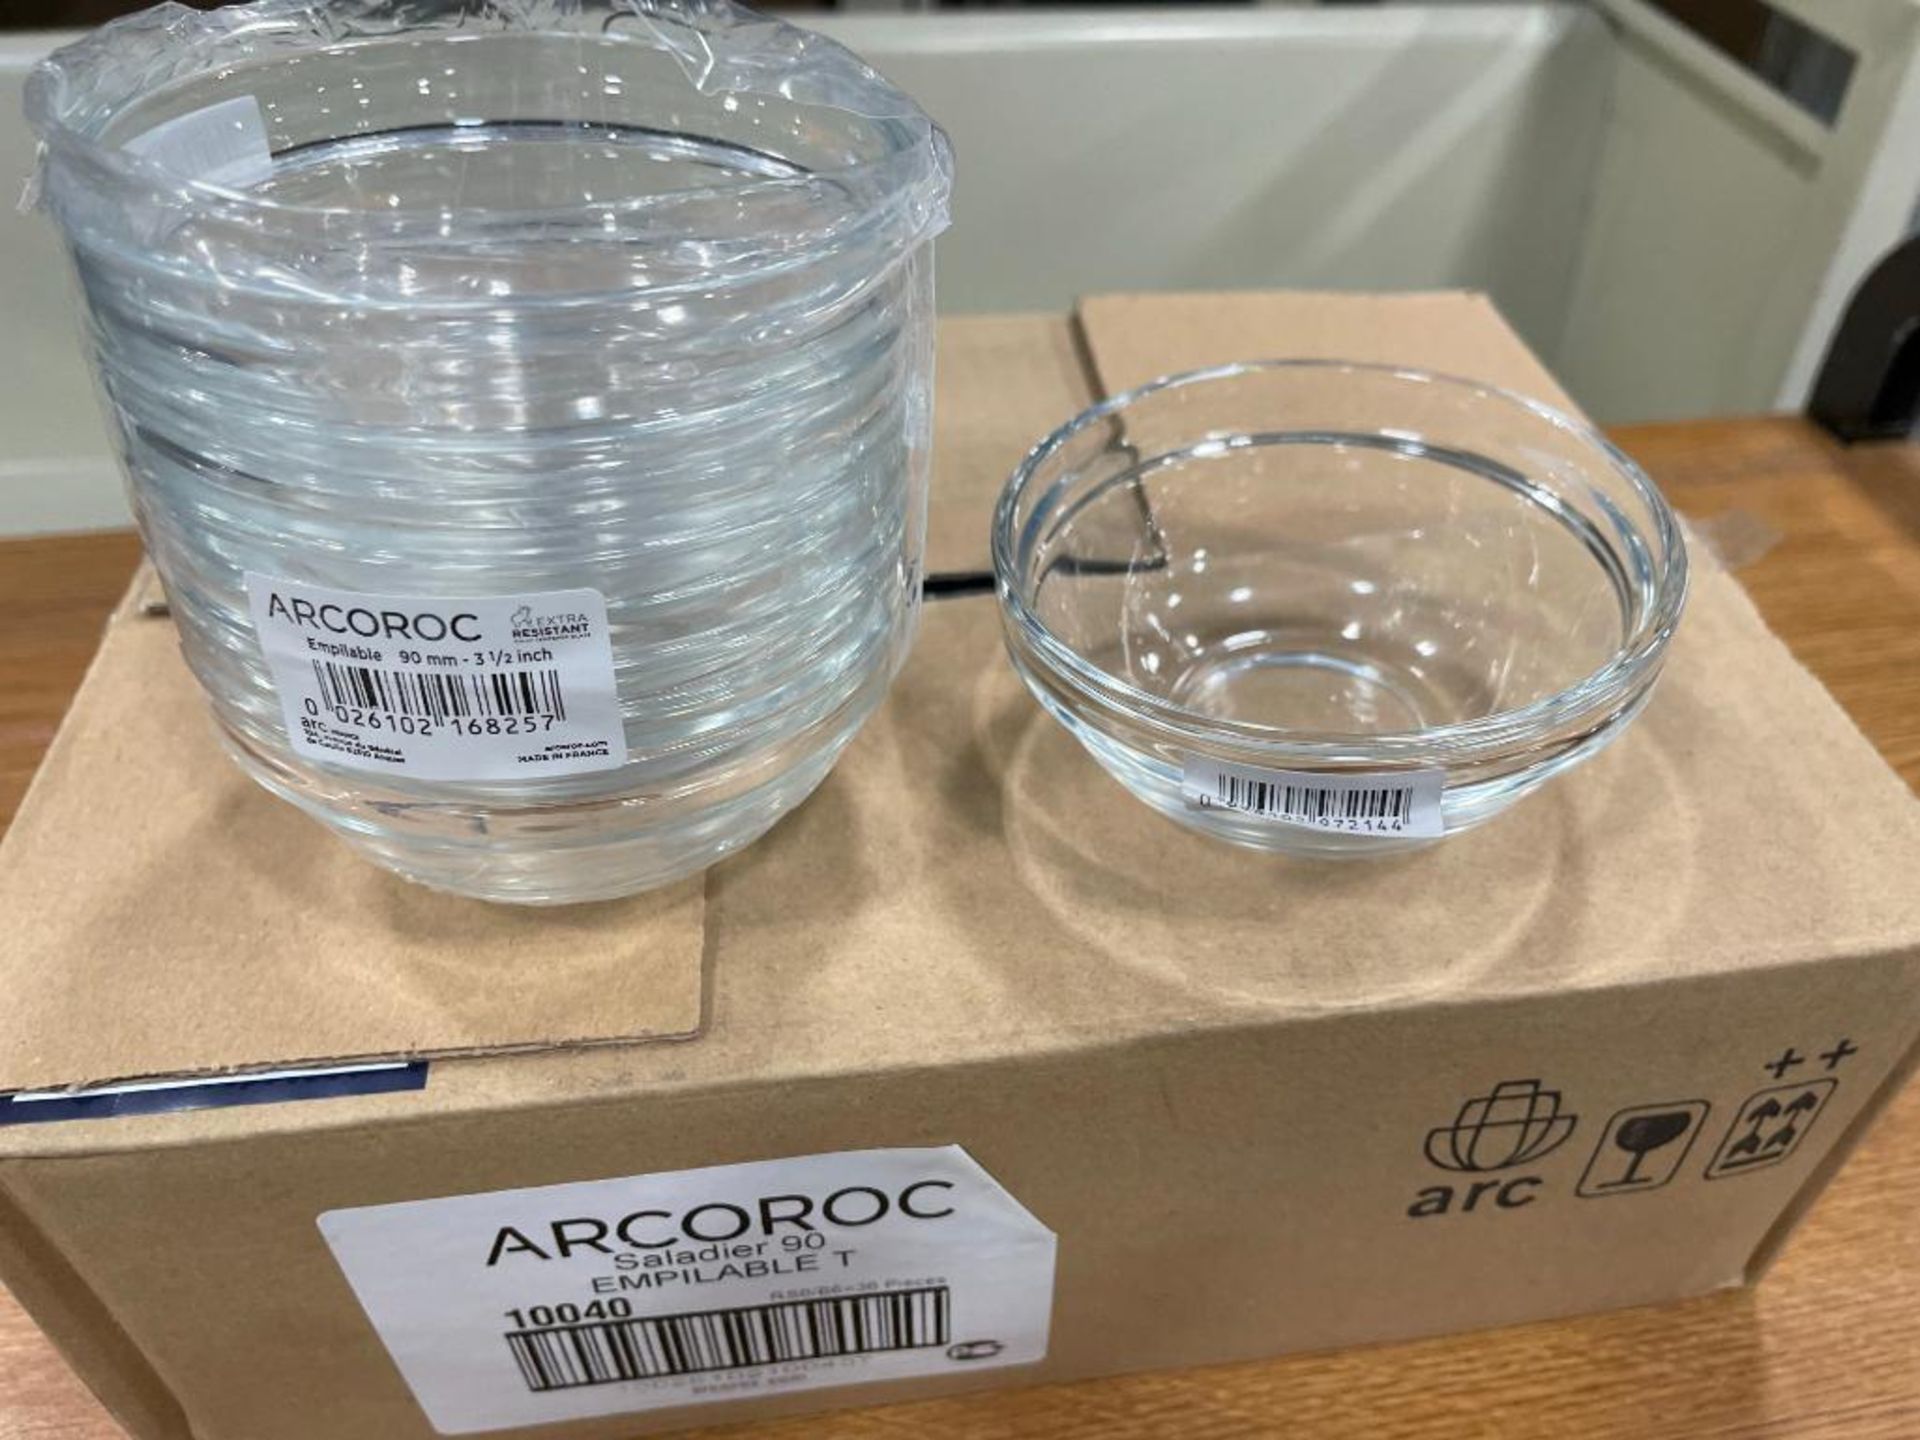 CASE OF ARCOROC 3.5" CLEAR GLASS STACKING SALAD BOWLS, 12 OZ - 36 PER CASE - NEW - Image 2 of 2